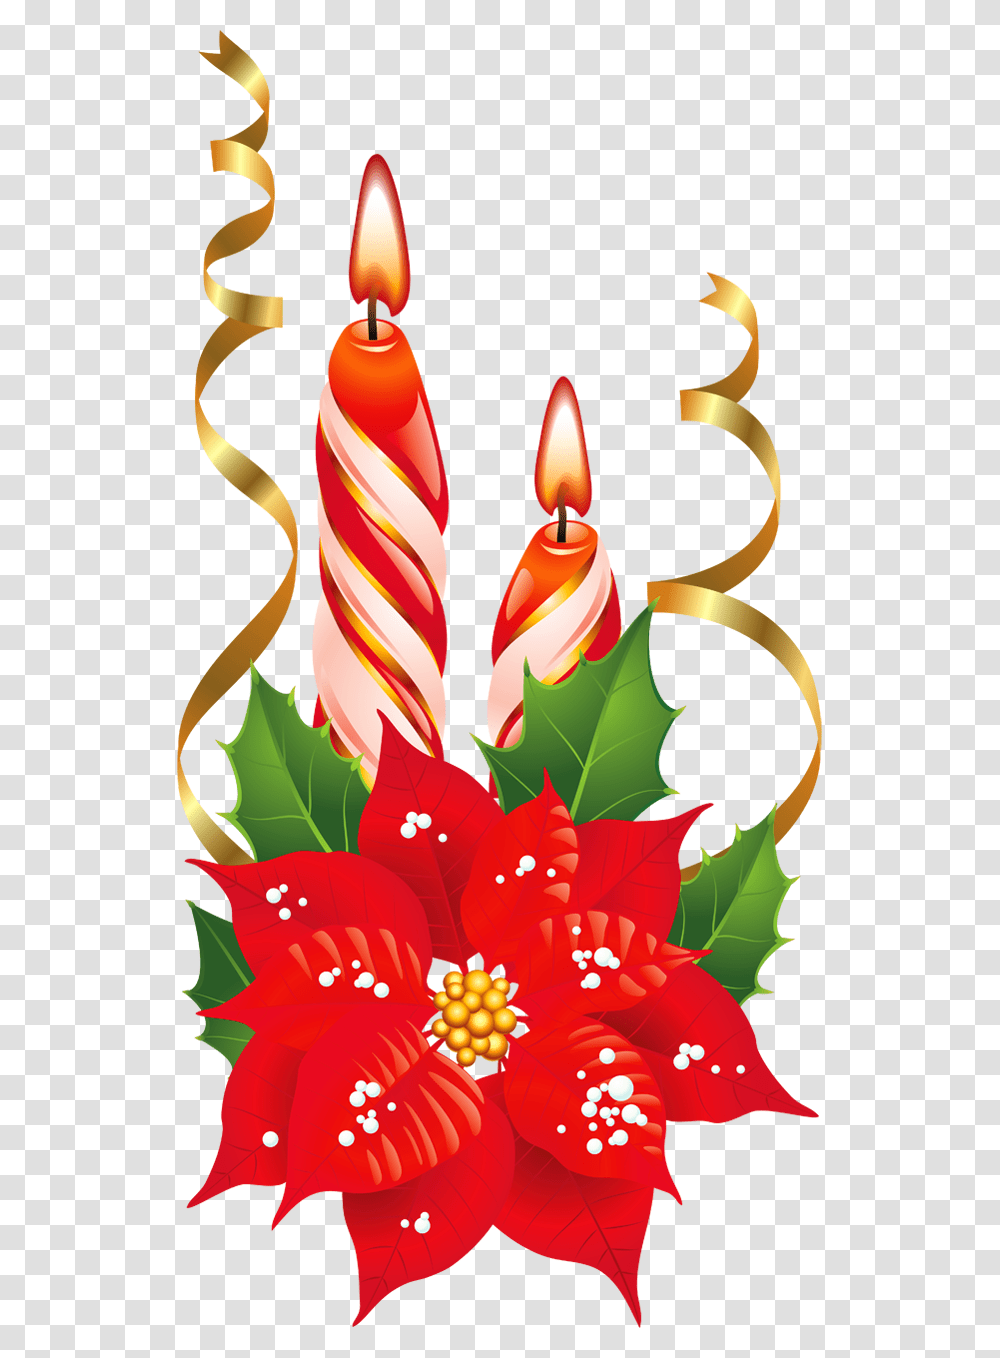 Red And White Christmas Candles With Poinsettia Christmas Candles Clipart, Leaf, Plant, Tree Transparent Png